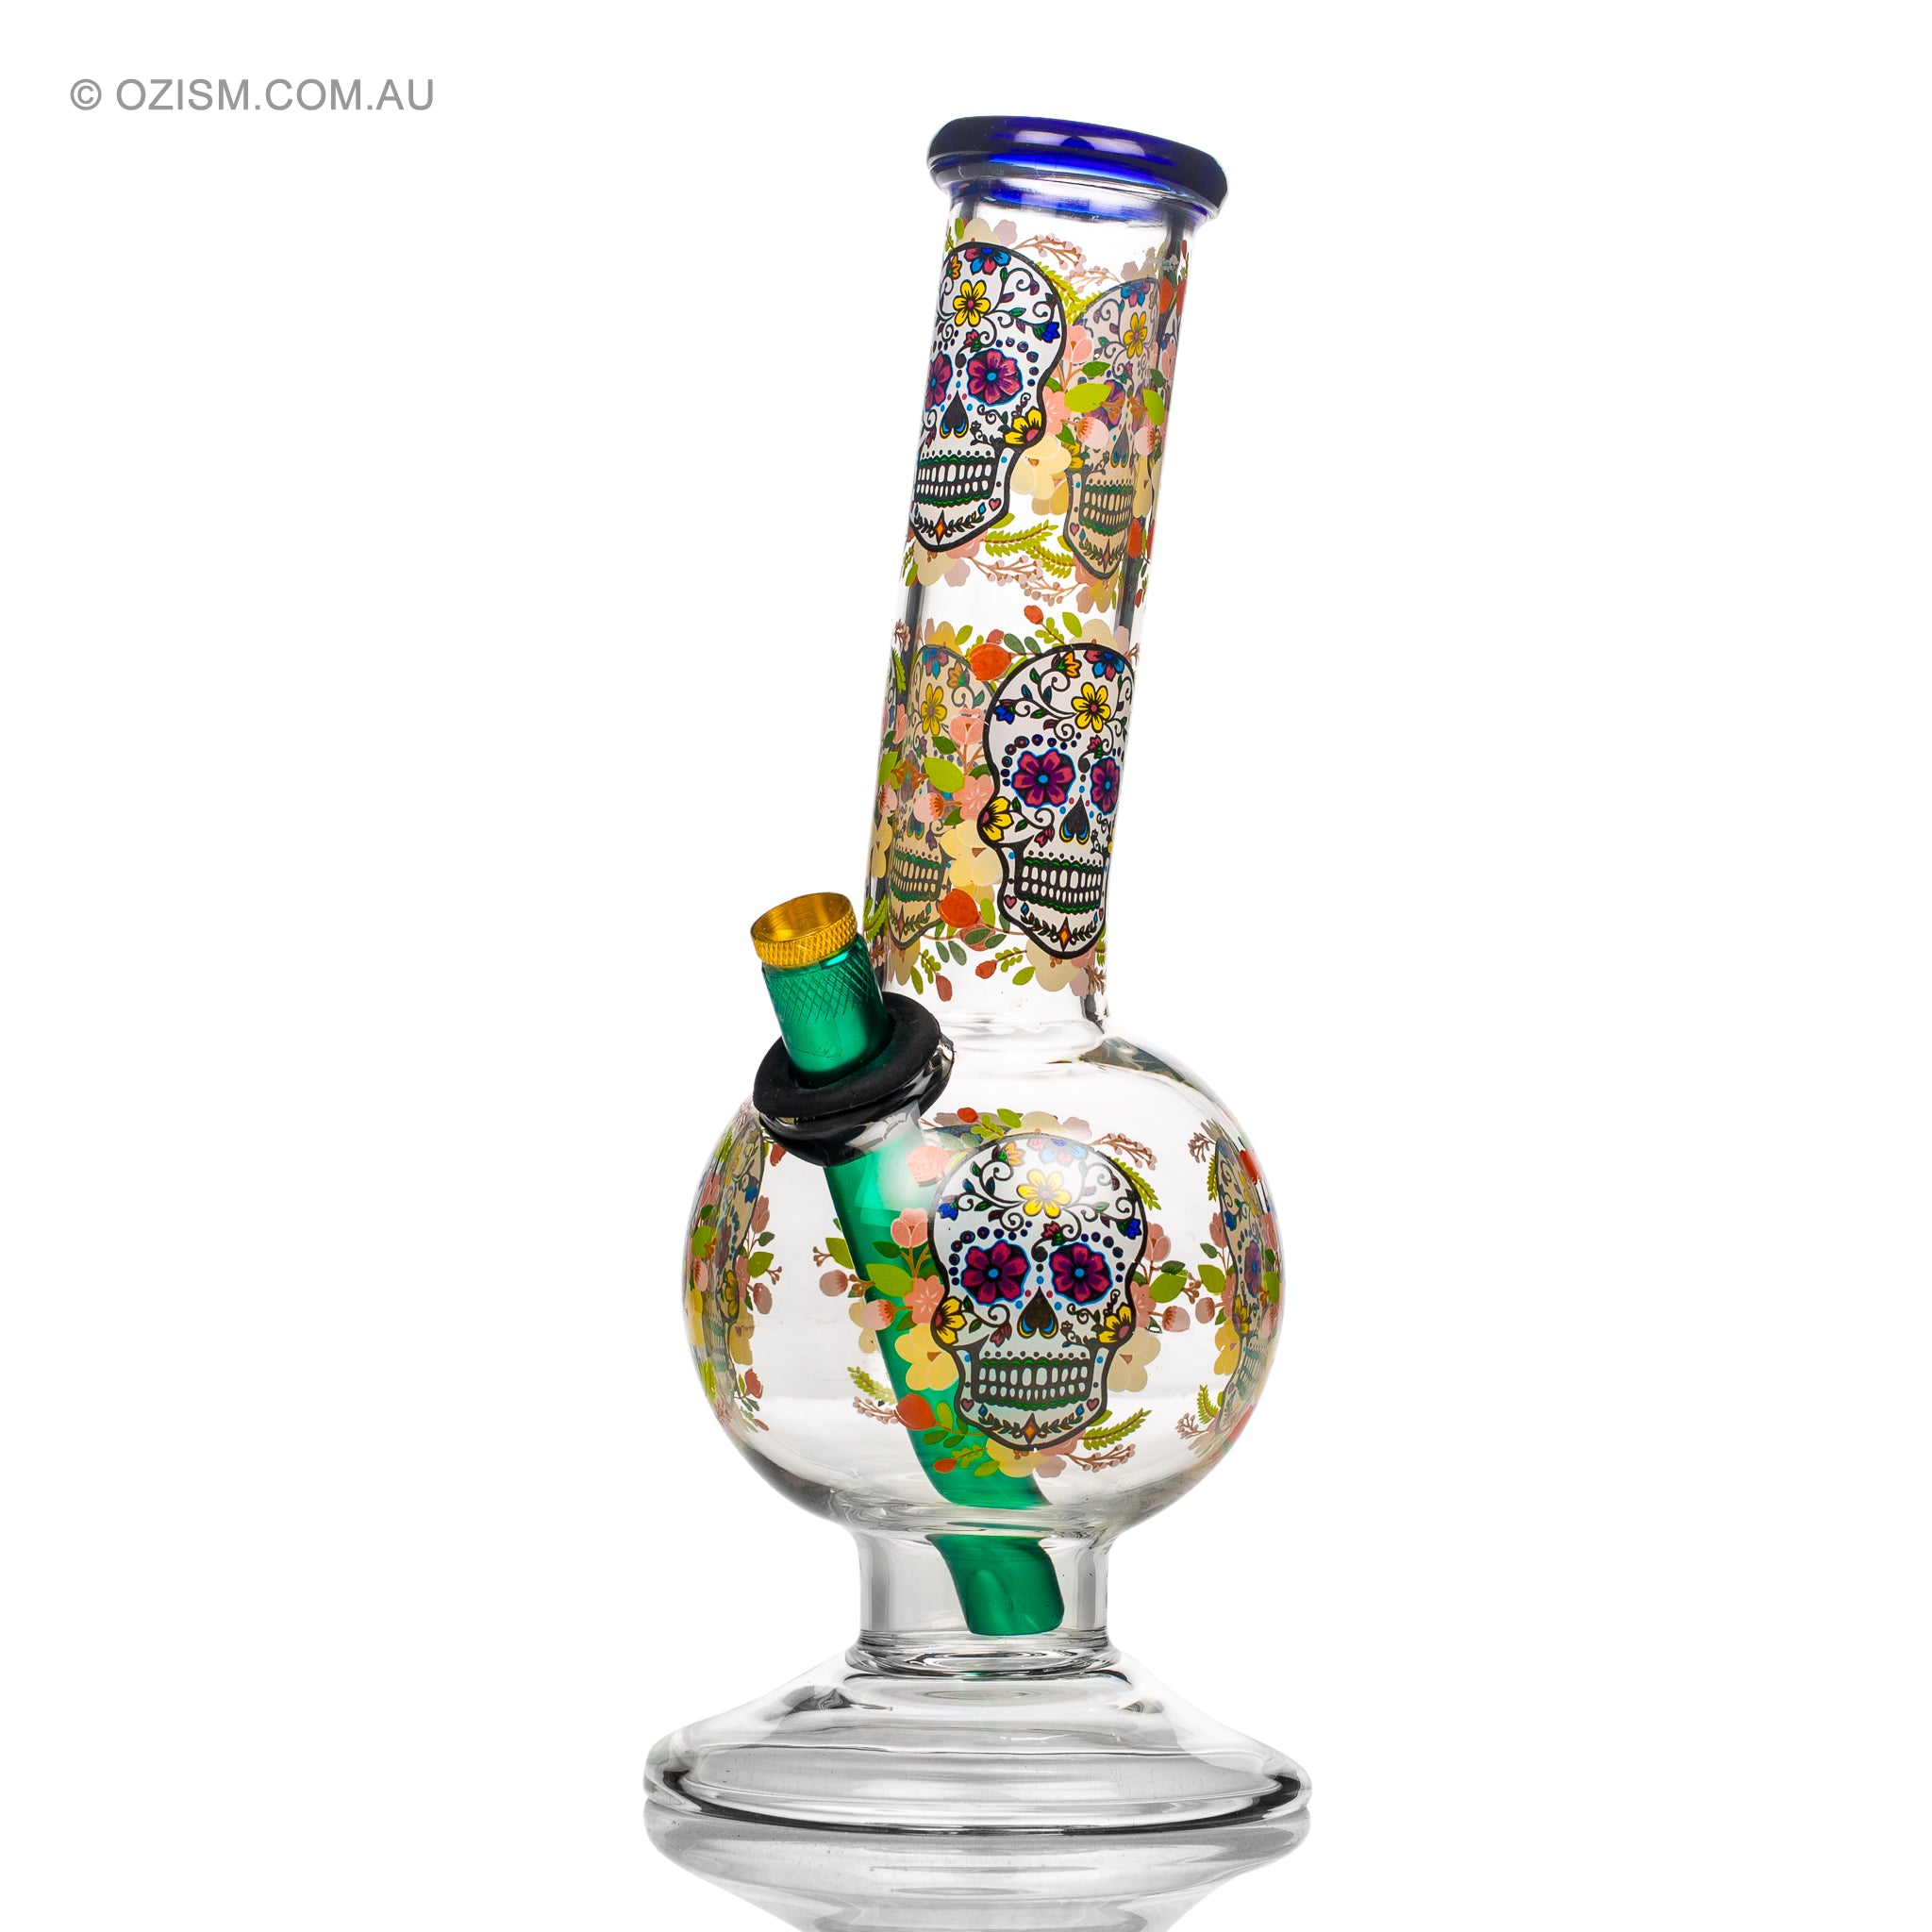 Aussie style glass bong with metal stem and brass cone piece.